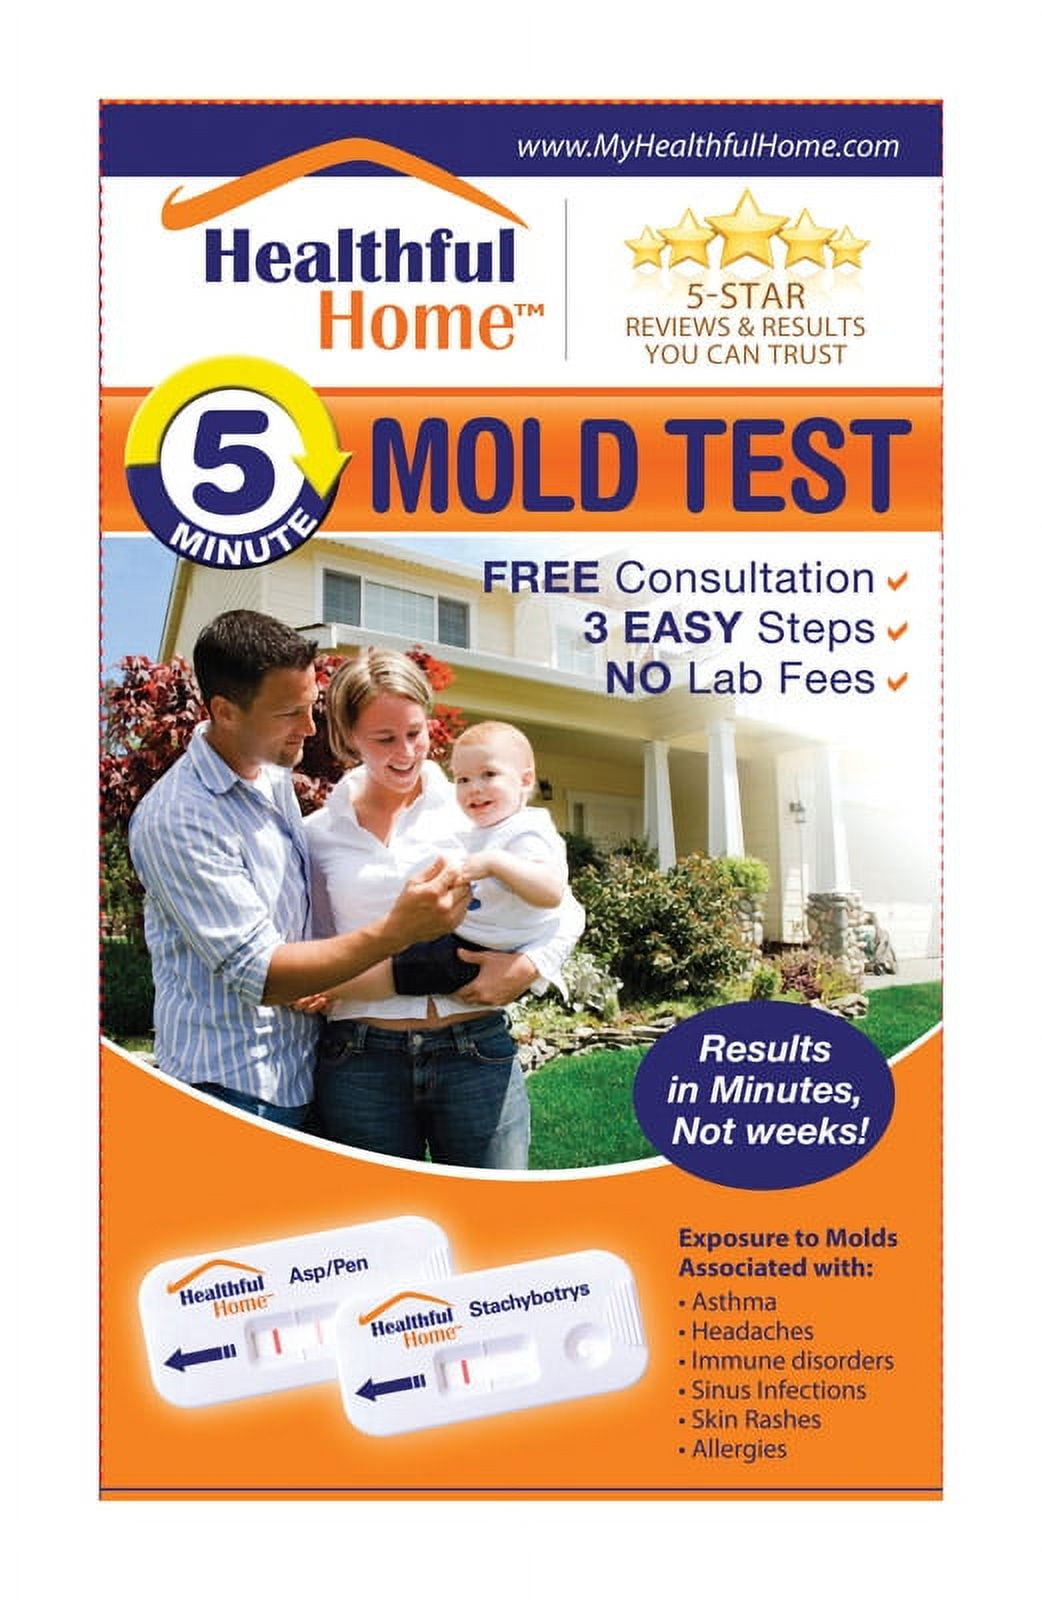 Buy DIY Mold Test KIT for Home (2 Tests). No Additional Shipping